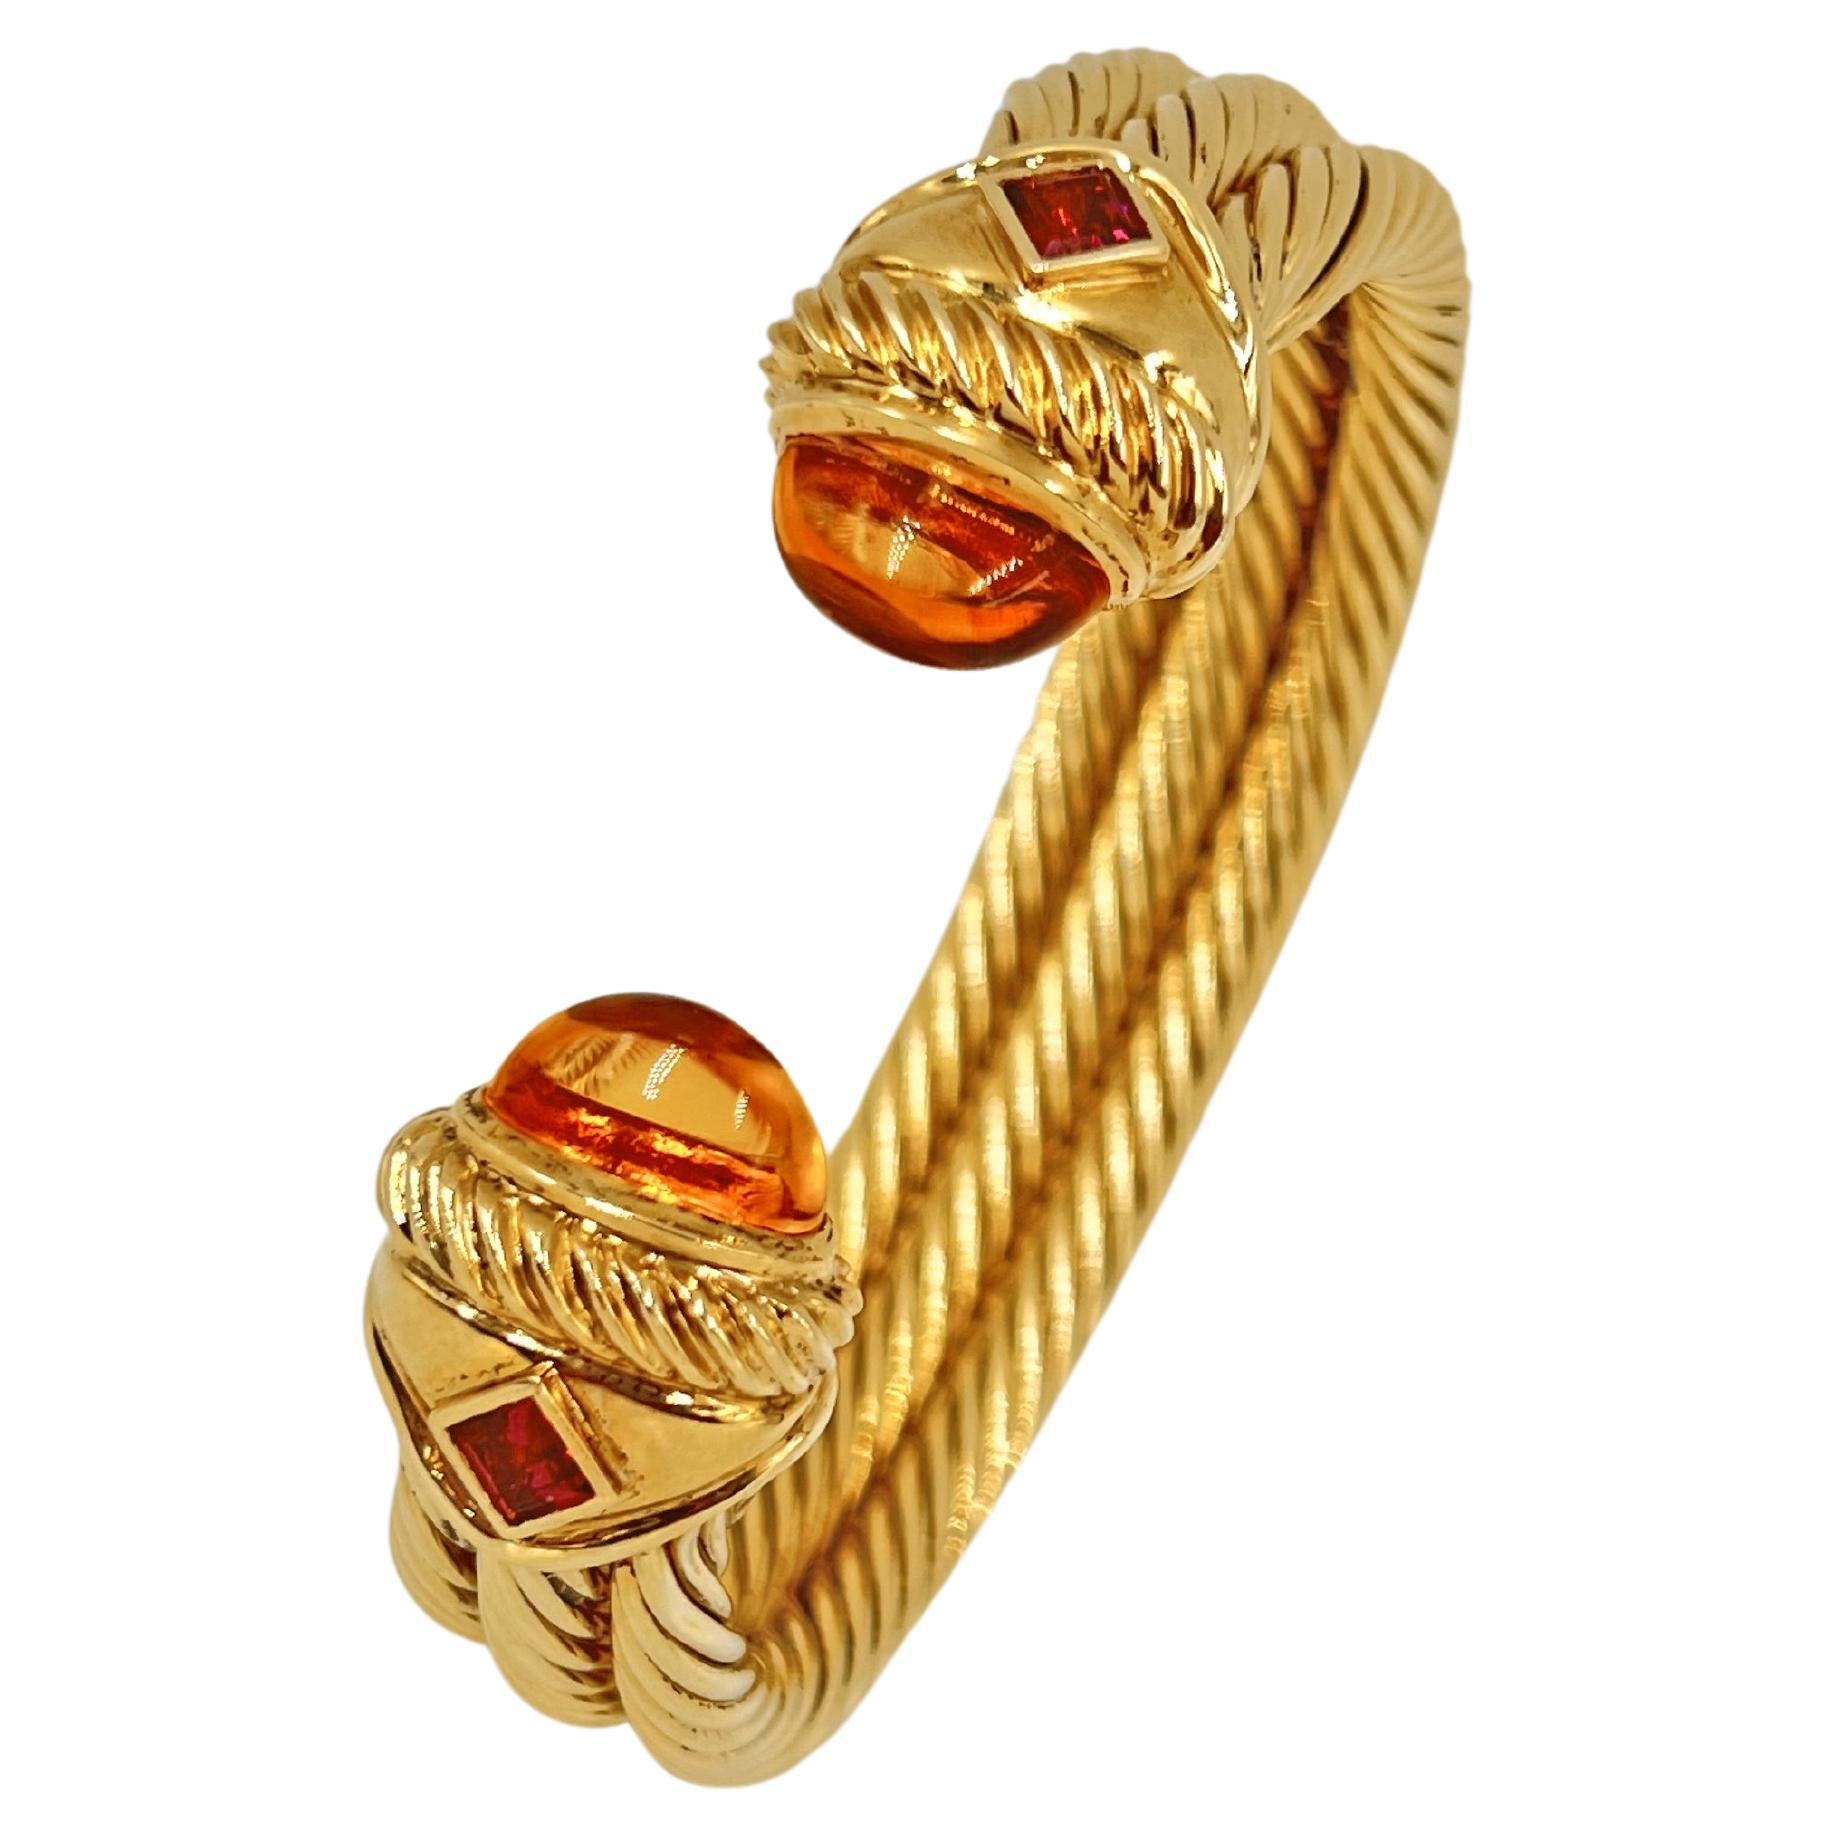 David Yurman iconic cable design bracelet in yellow gold with citrine and garnet gemstones.  Triple twisted gold cable, accented by two square, step-cut 4mm rhodolite garnets, and 13 x 5mm citrine cabochons, bezel set as end caps.  Polished finish.